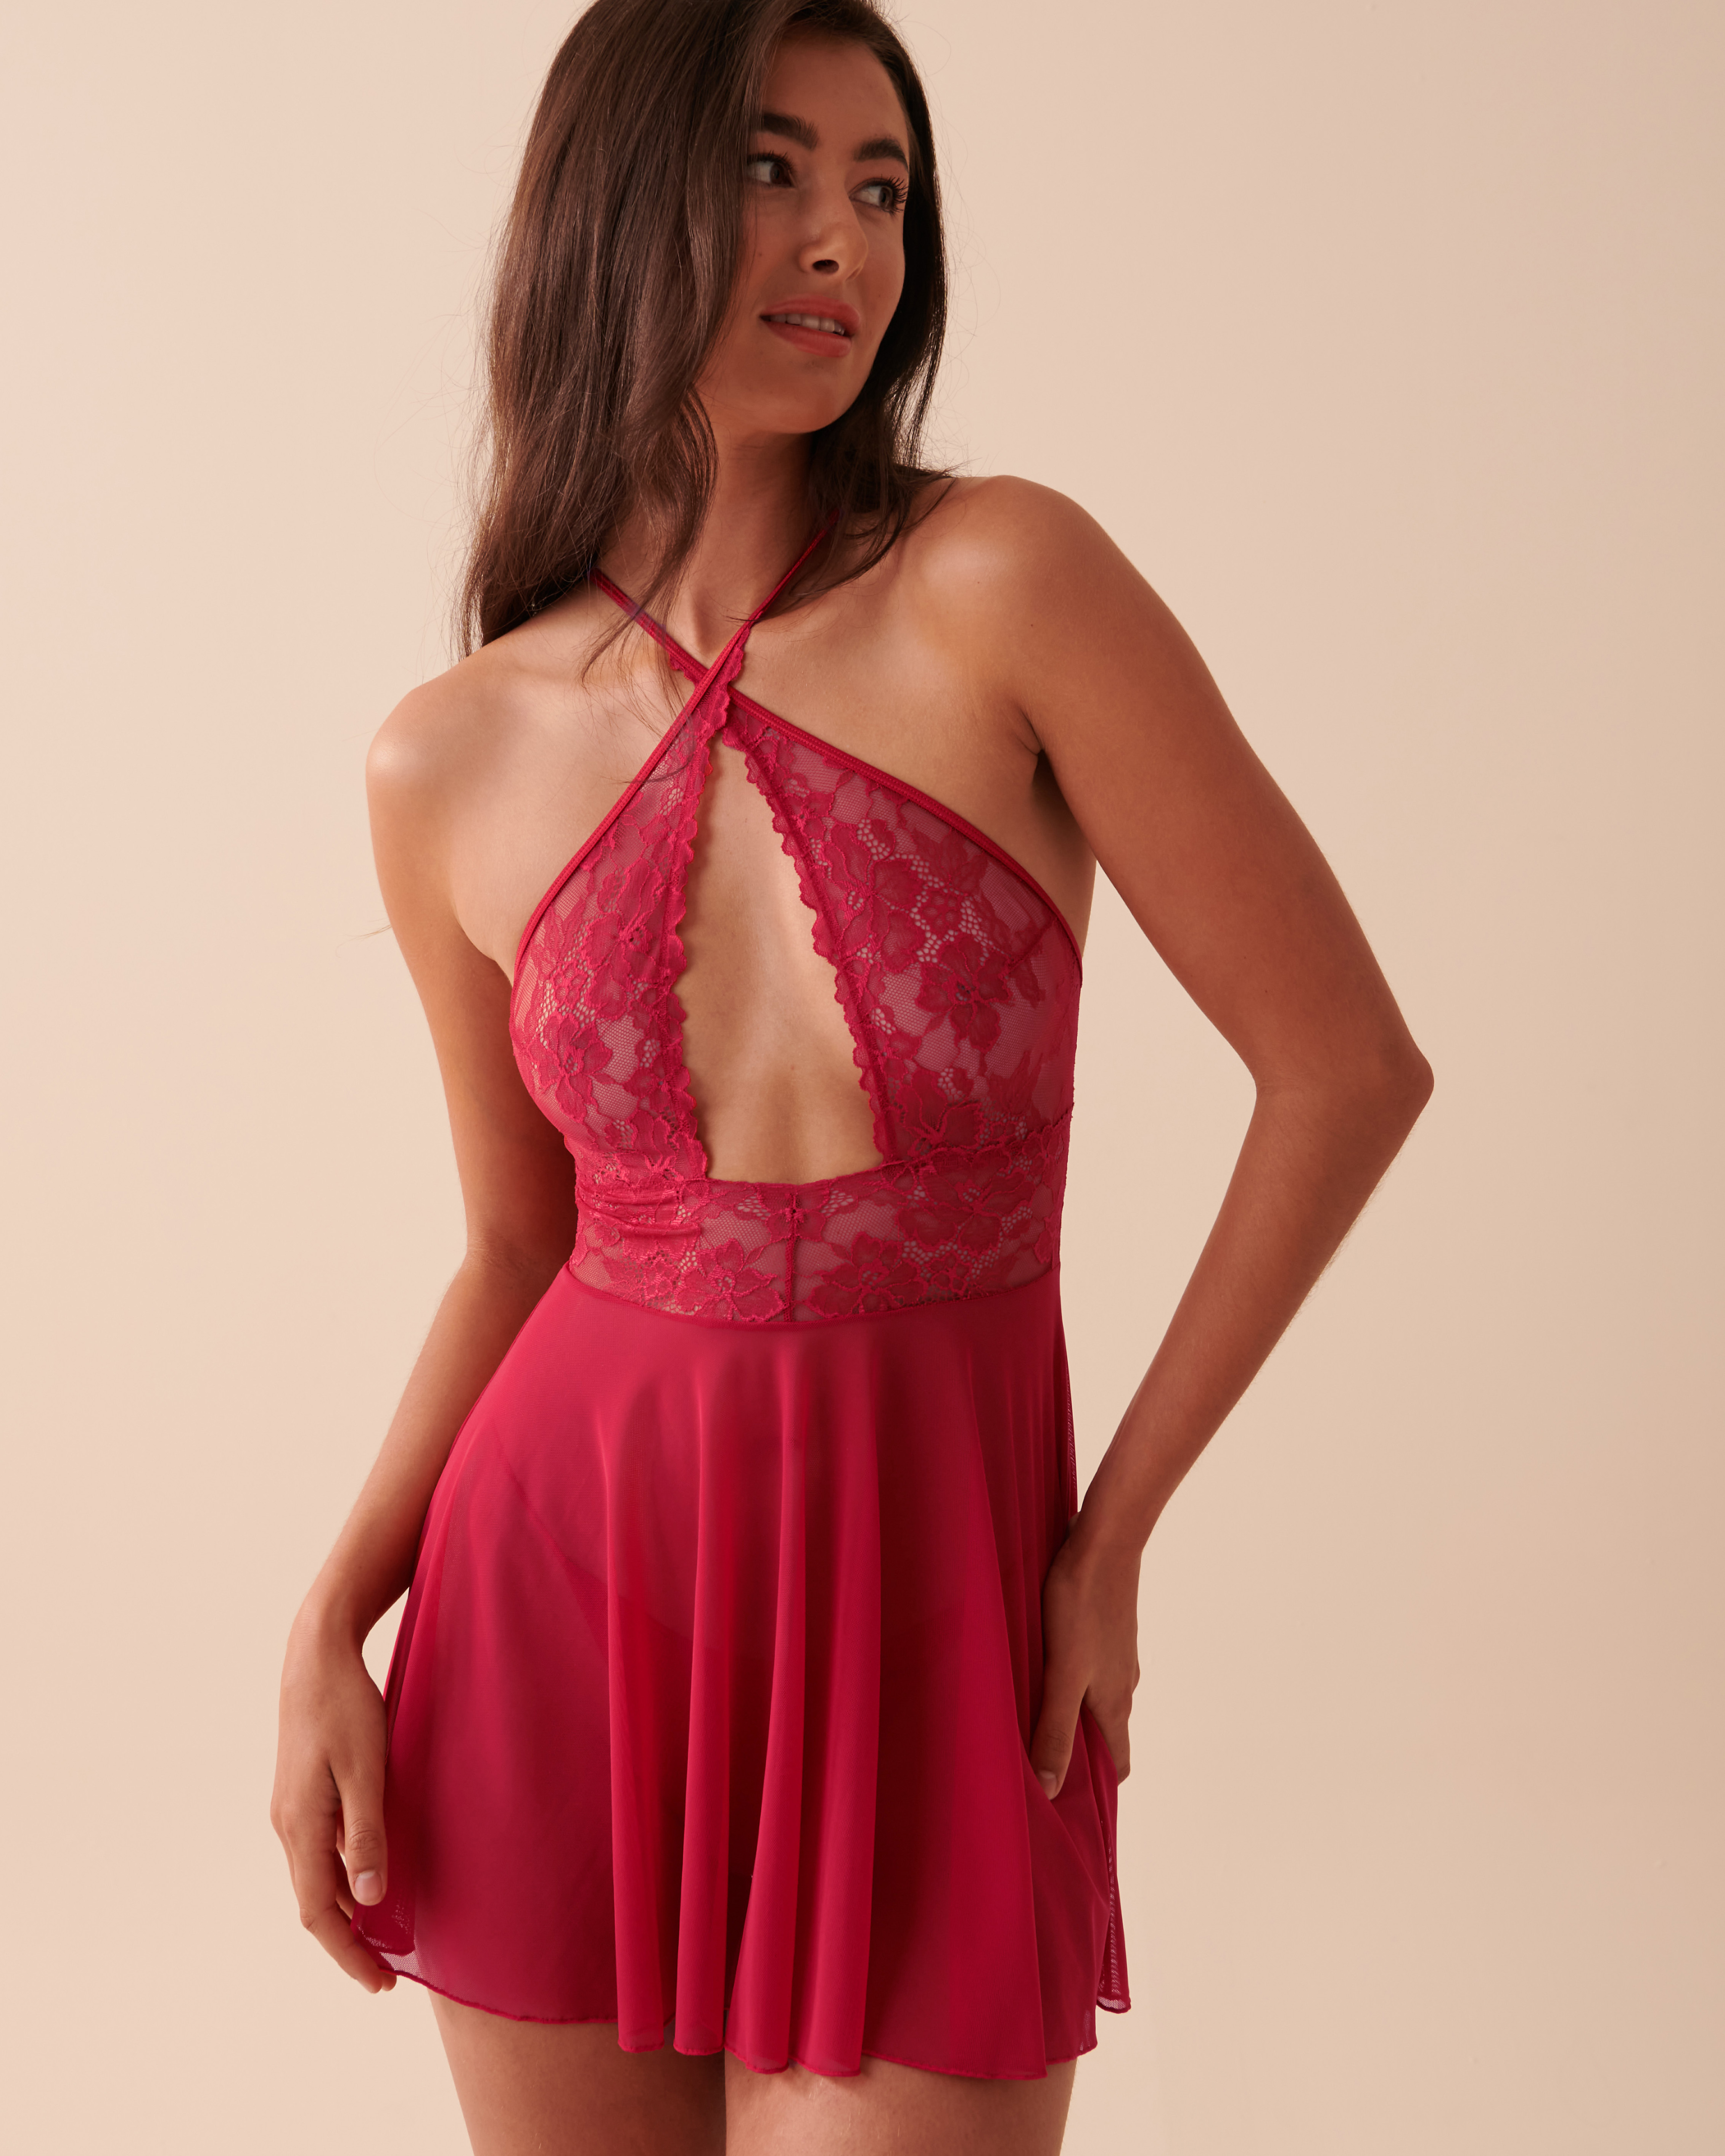 Red Polyester Lace Babydoll For Women at Rs 120/set